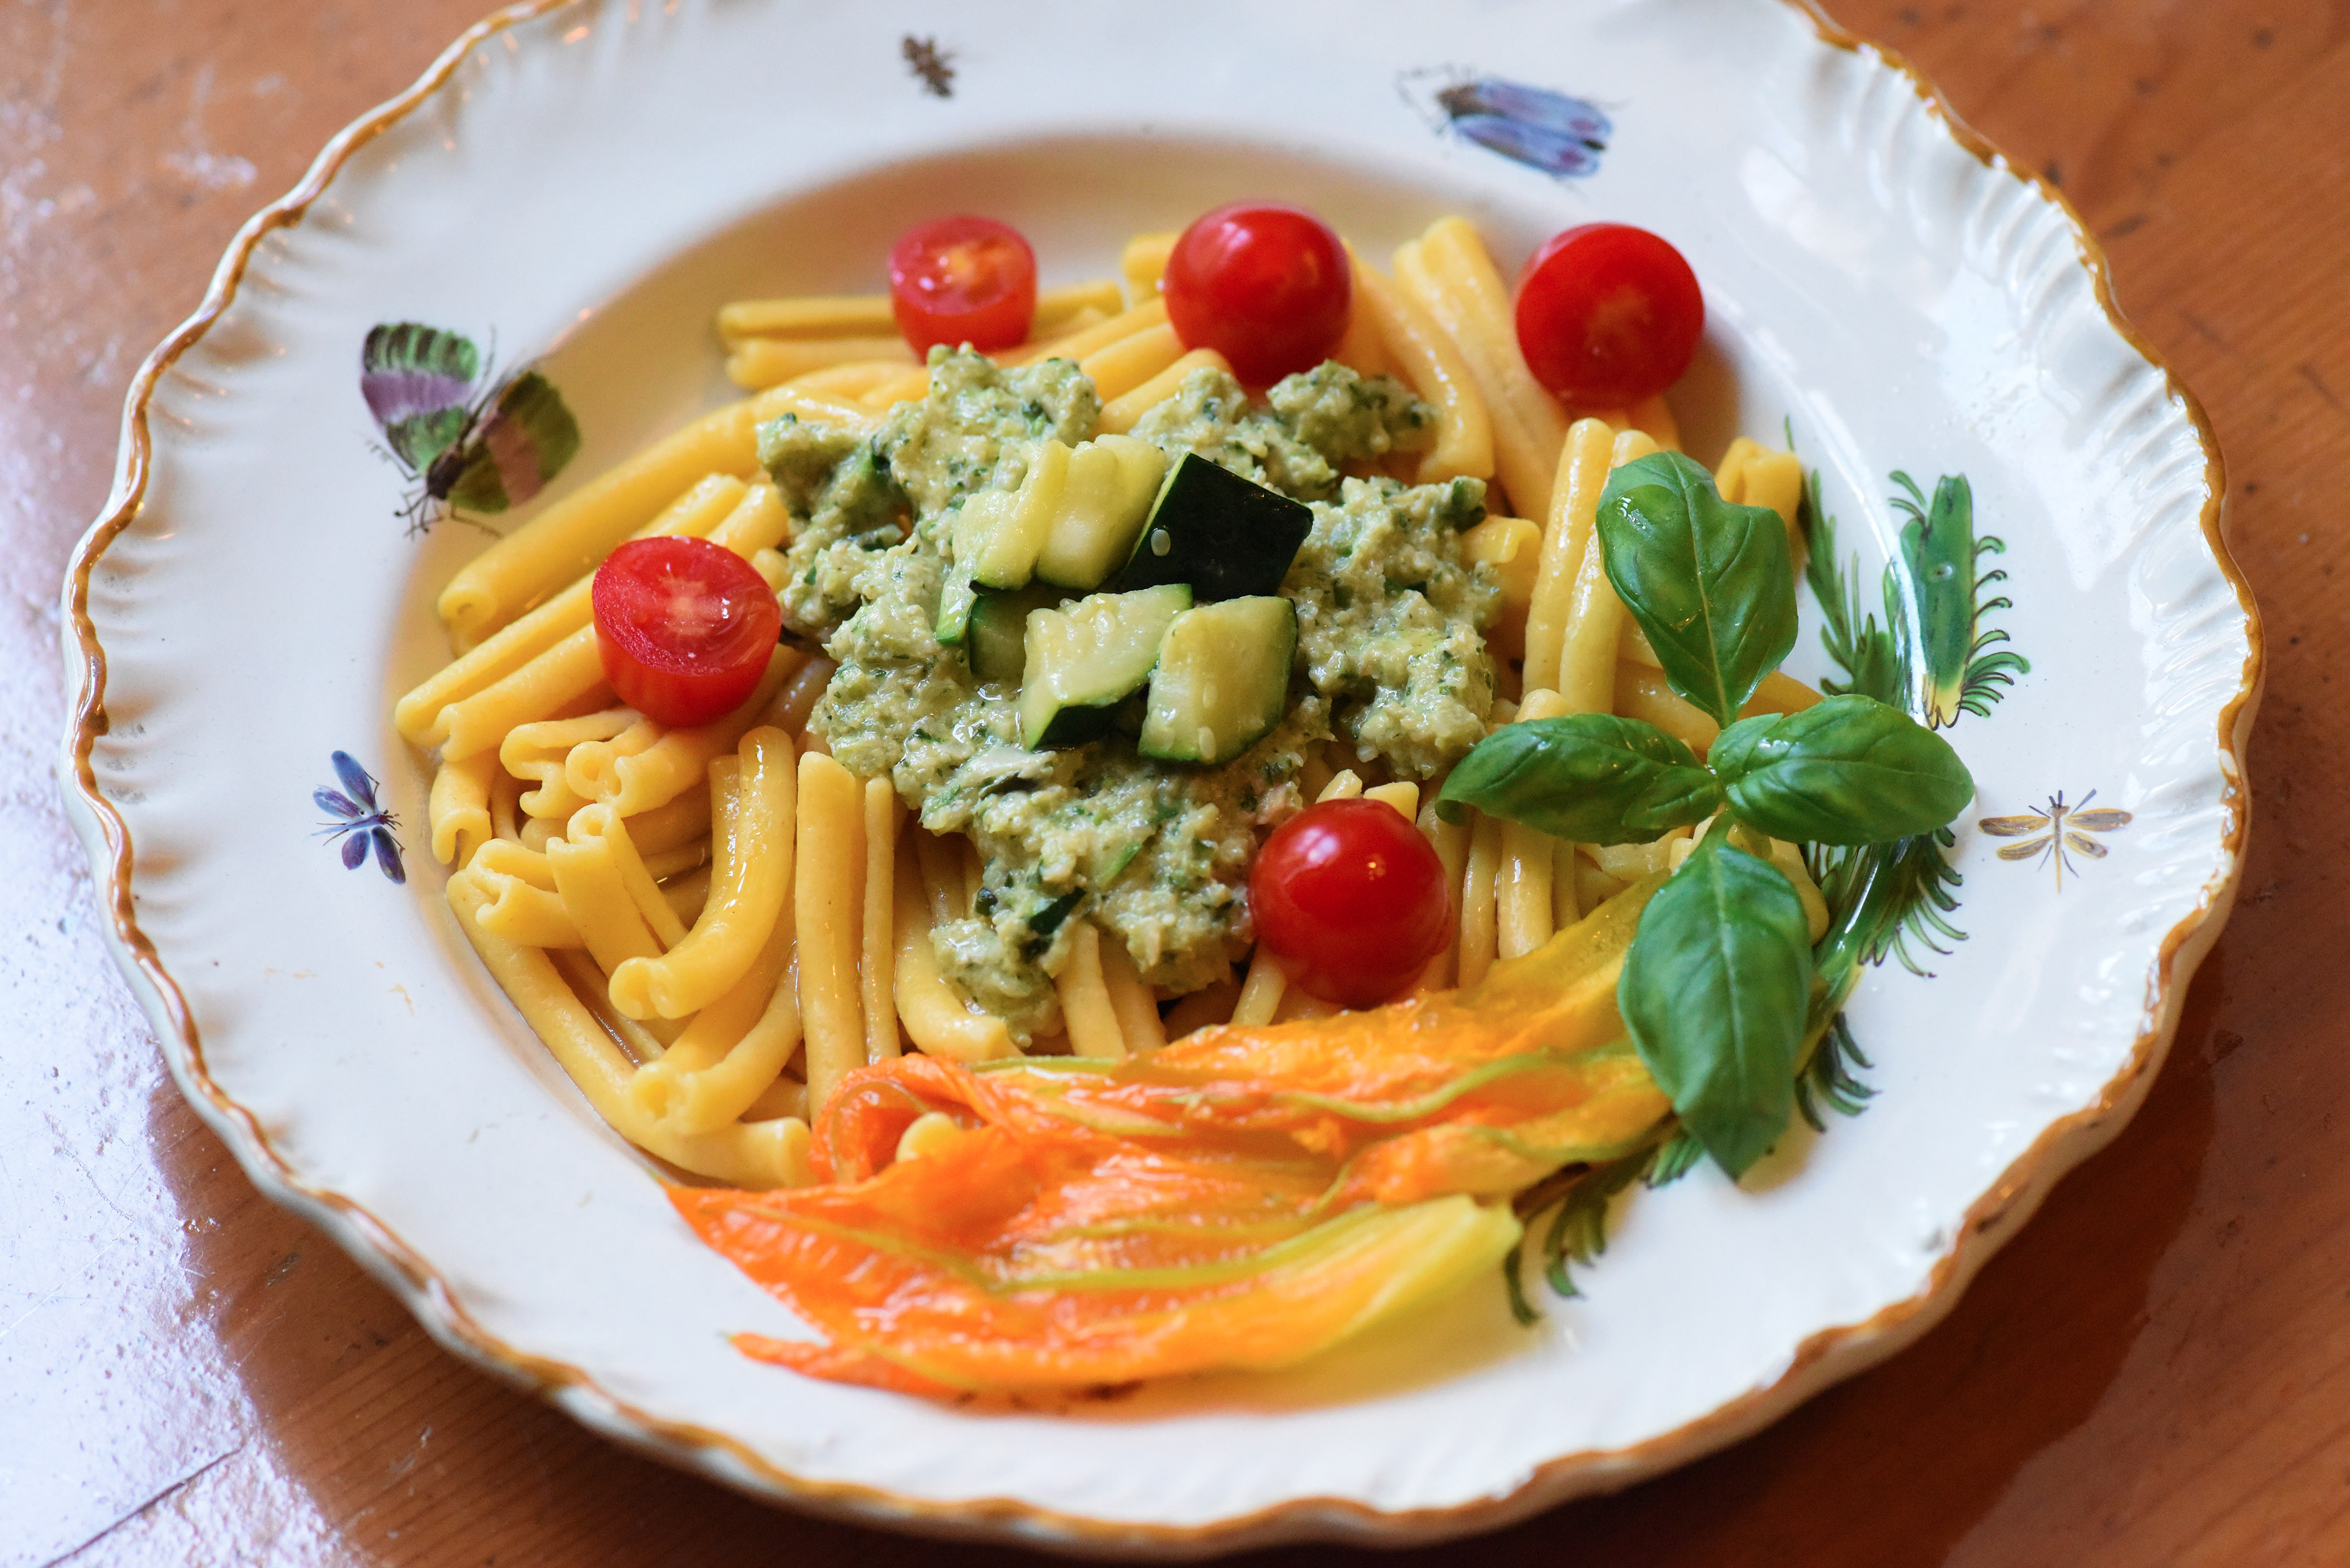 Pasta Rustica with a courgette 'pesto' sauce, cherry tomatoes and pumpkin flowers